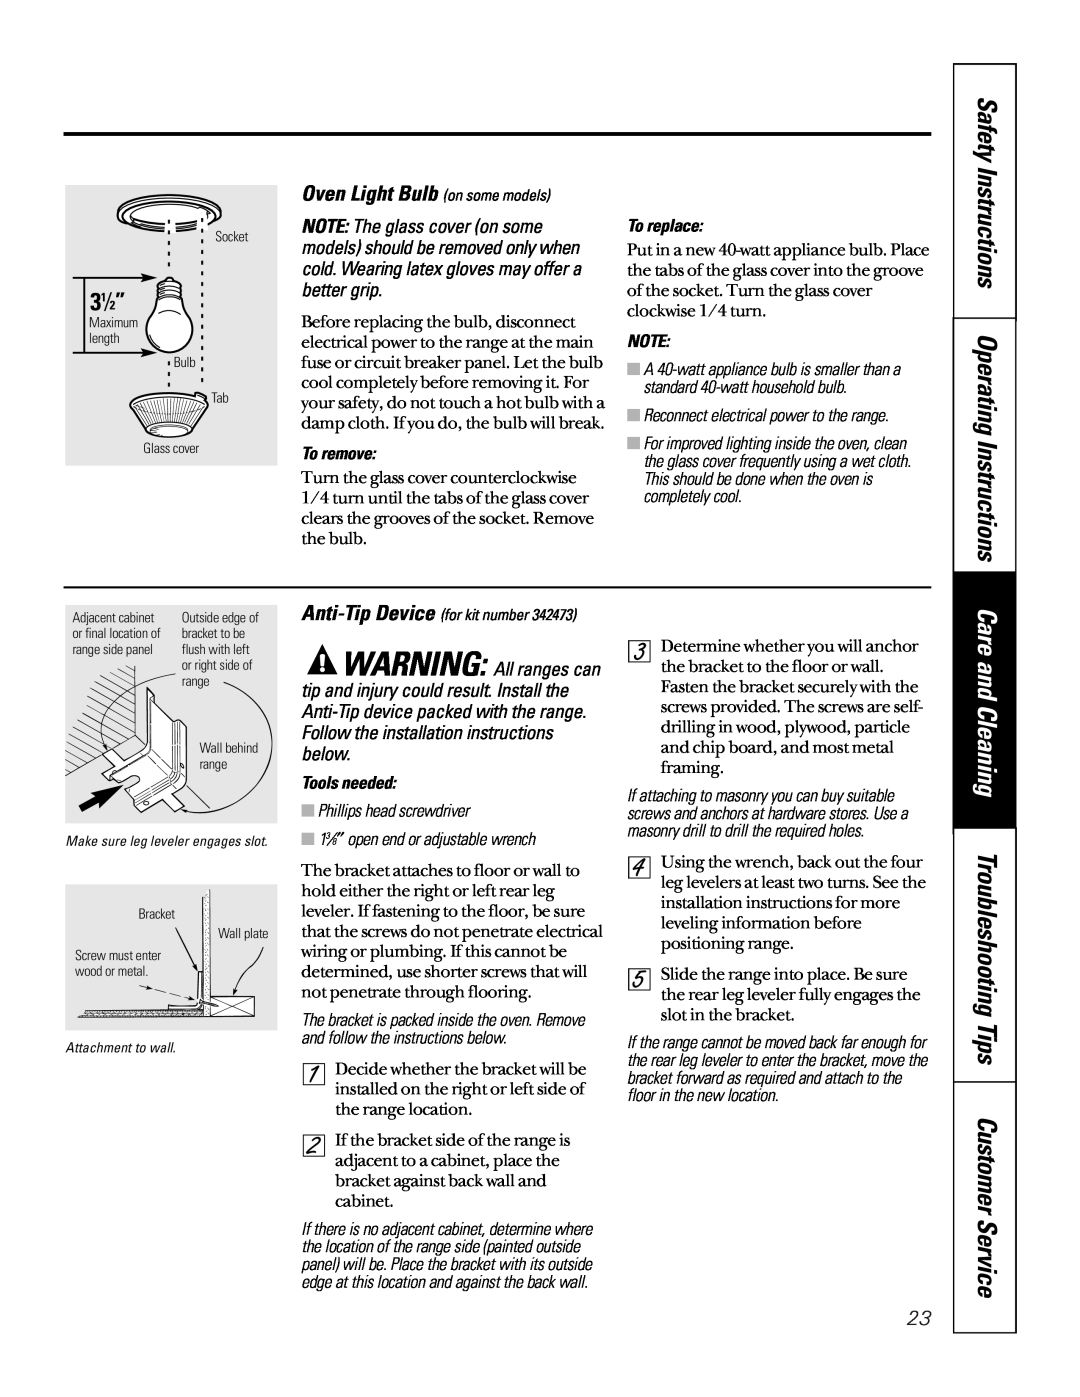 GE LEB356 Safety Instructions Operating Instructions, 31⁄2”, Oven Light Bulb on some models, Phillips head screwdriver 